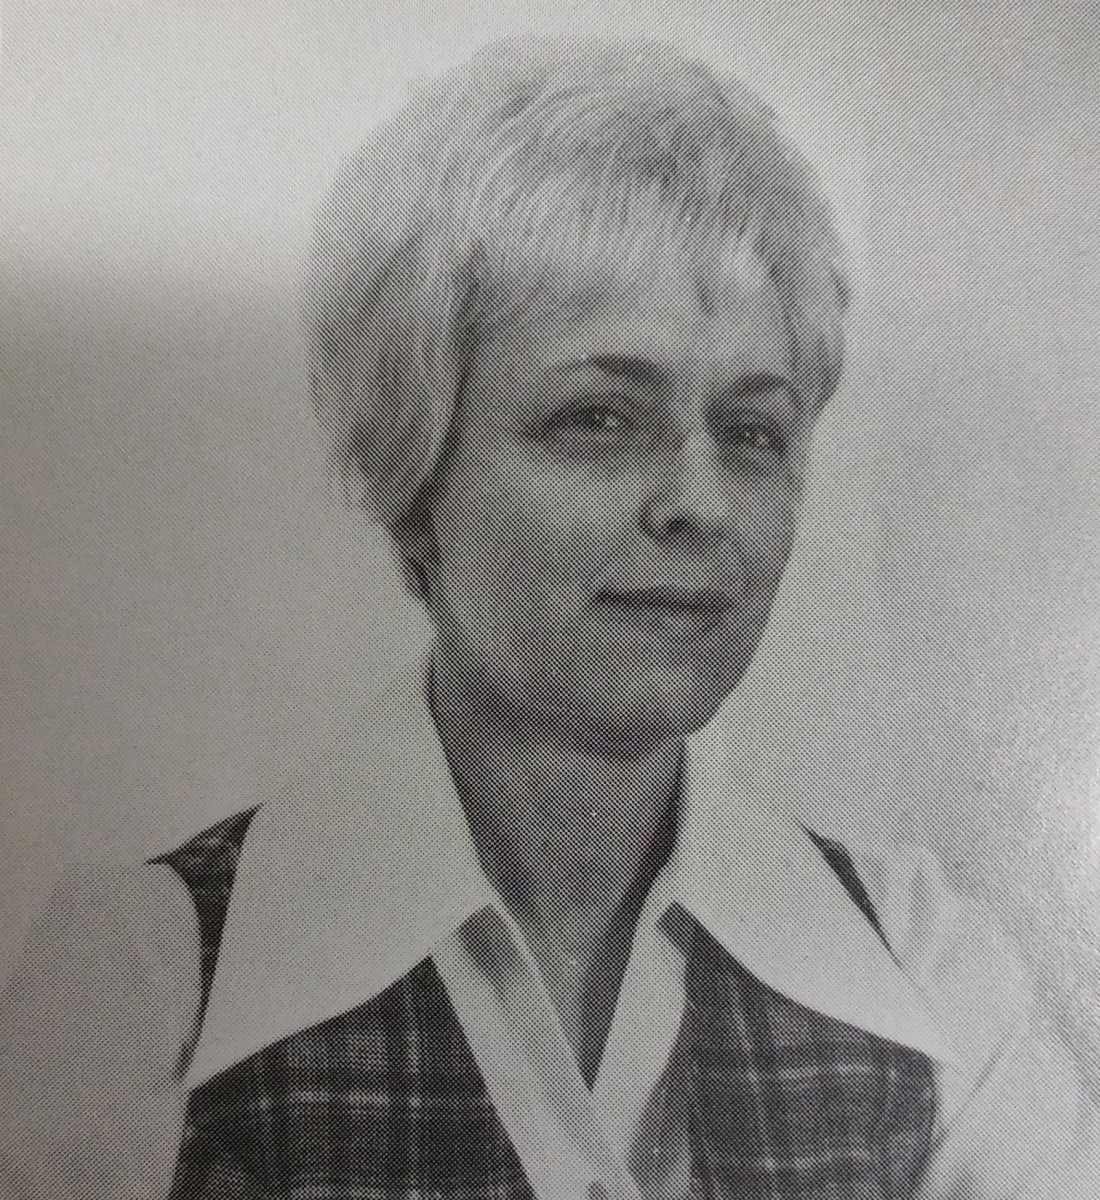 Black & white photo of Sybil Reed taken from SCC's 1975 yearbook.